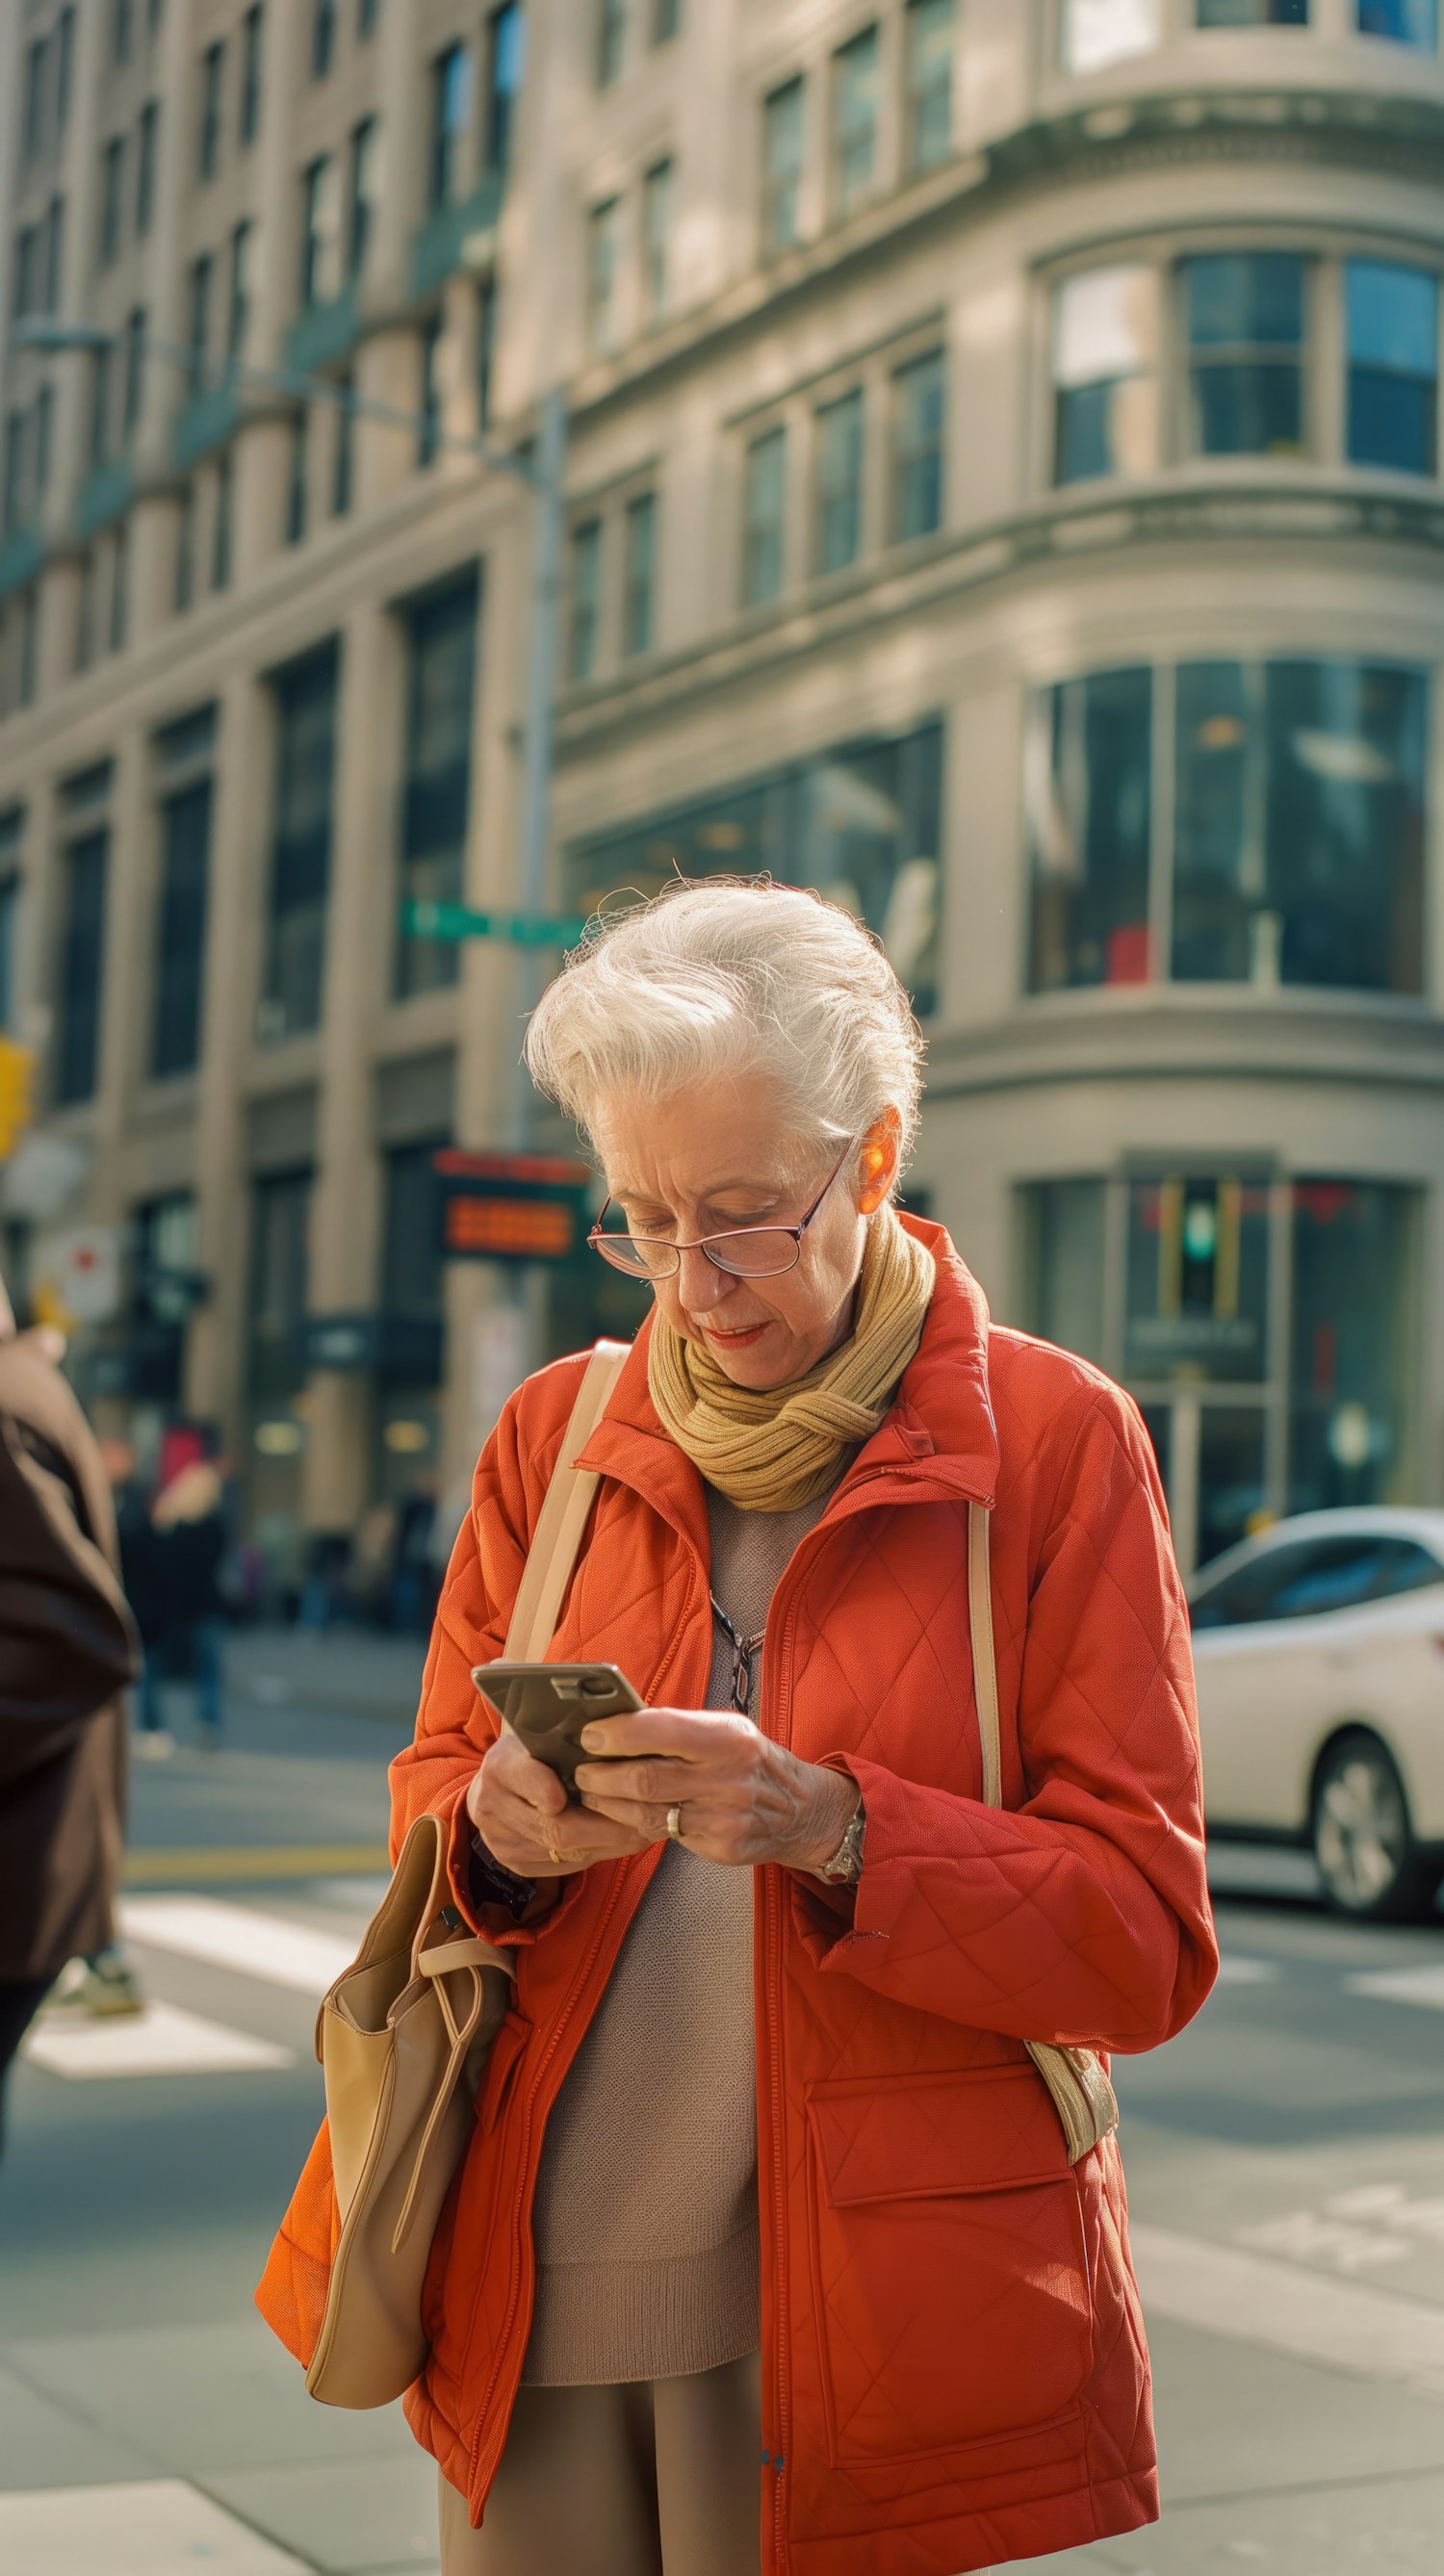 Elderly Woman Engaged with Smartphone on Busy Street